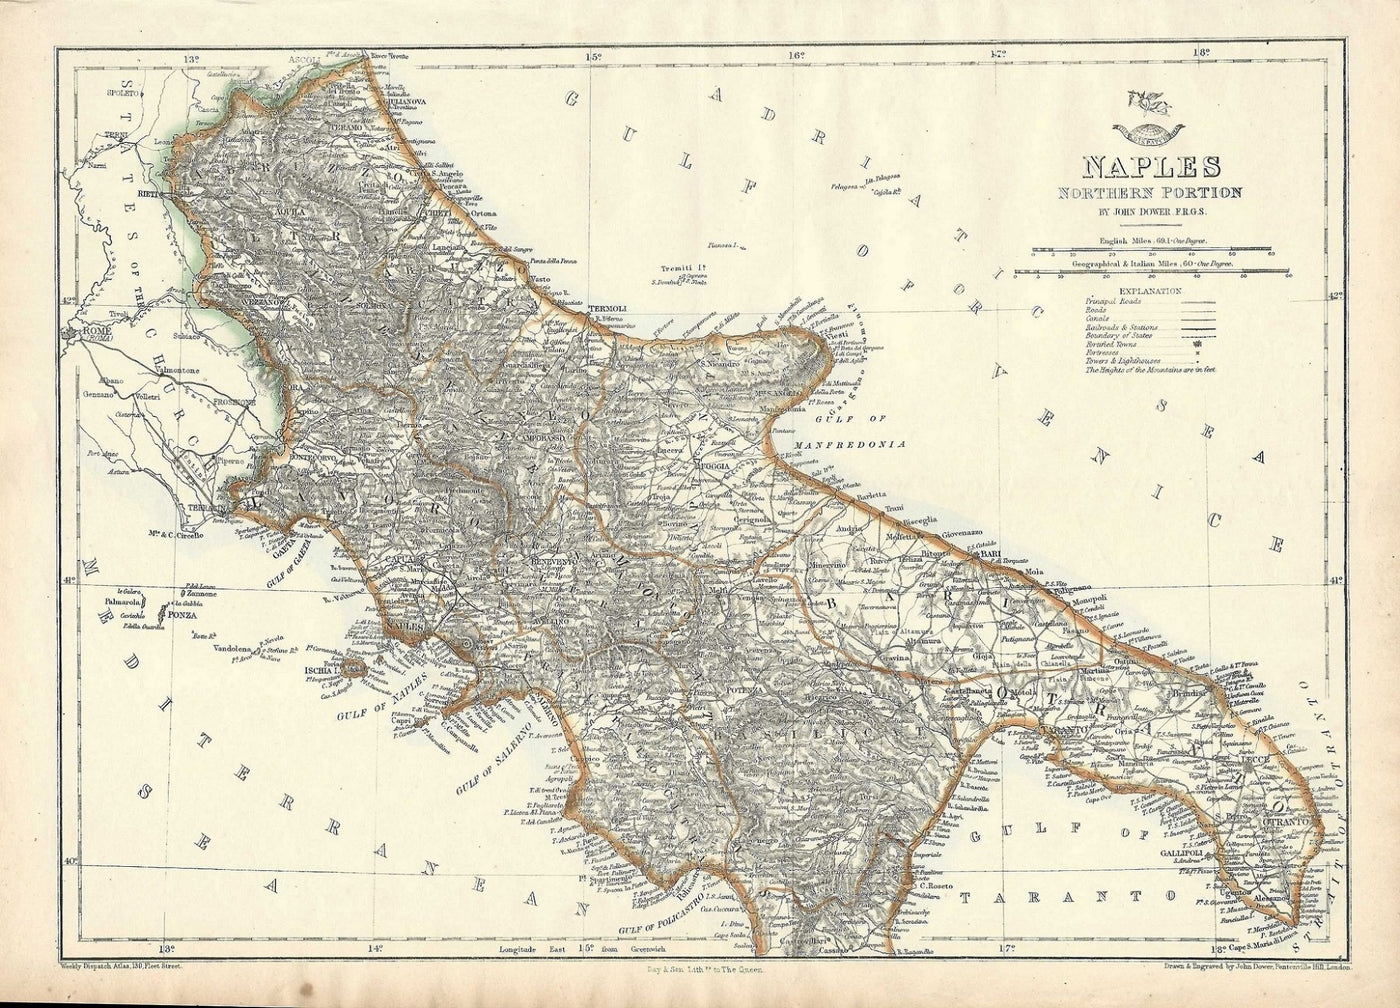 Naples antique map Weekly Dispatch Atlas published 1863